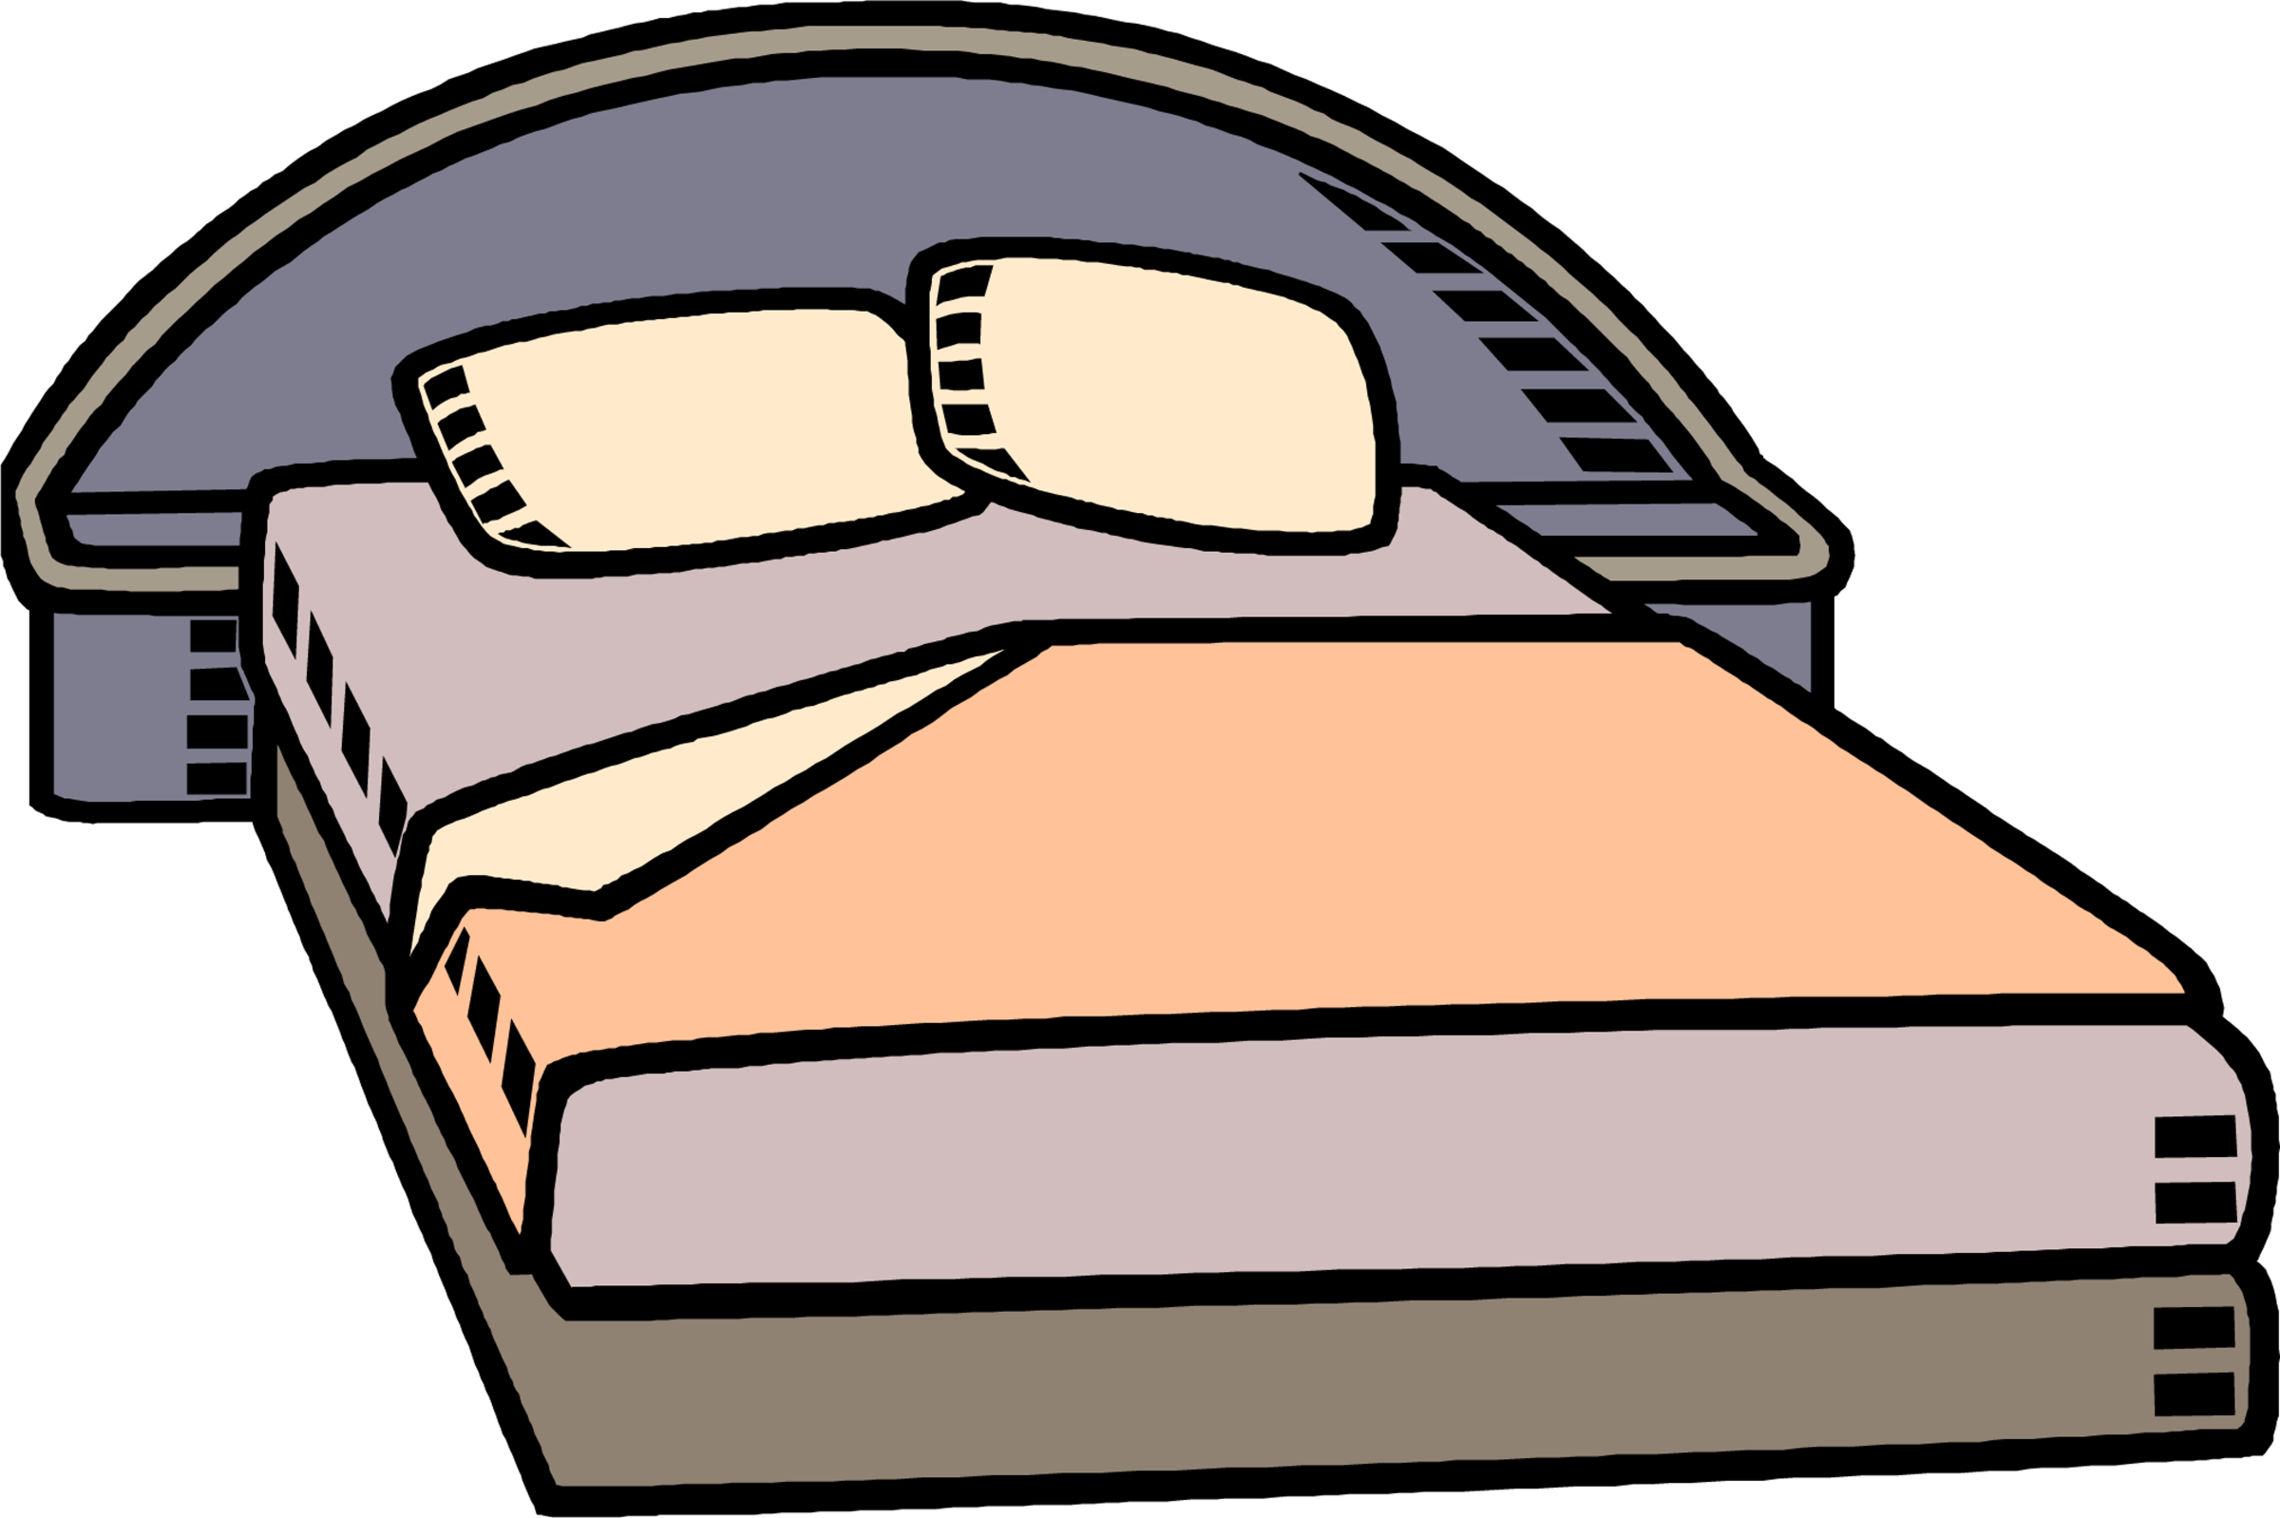 Make Bed Animated Picture Clipart - Free to use Clip Art Resource